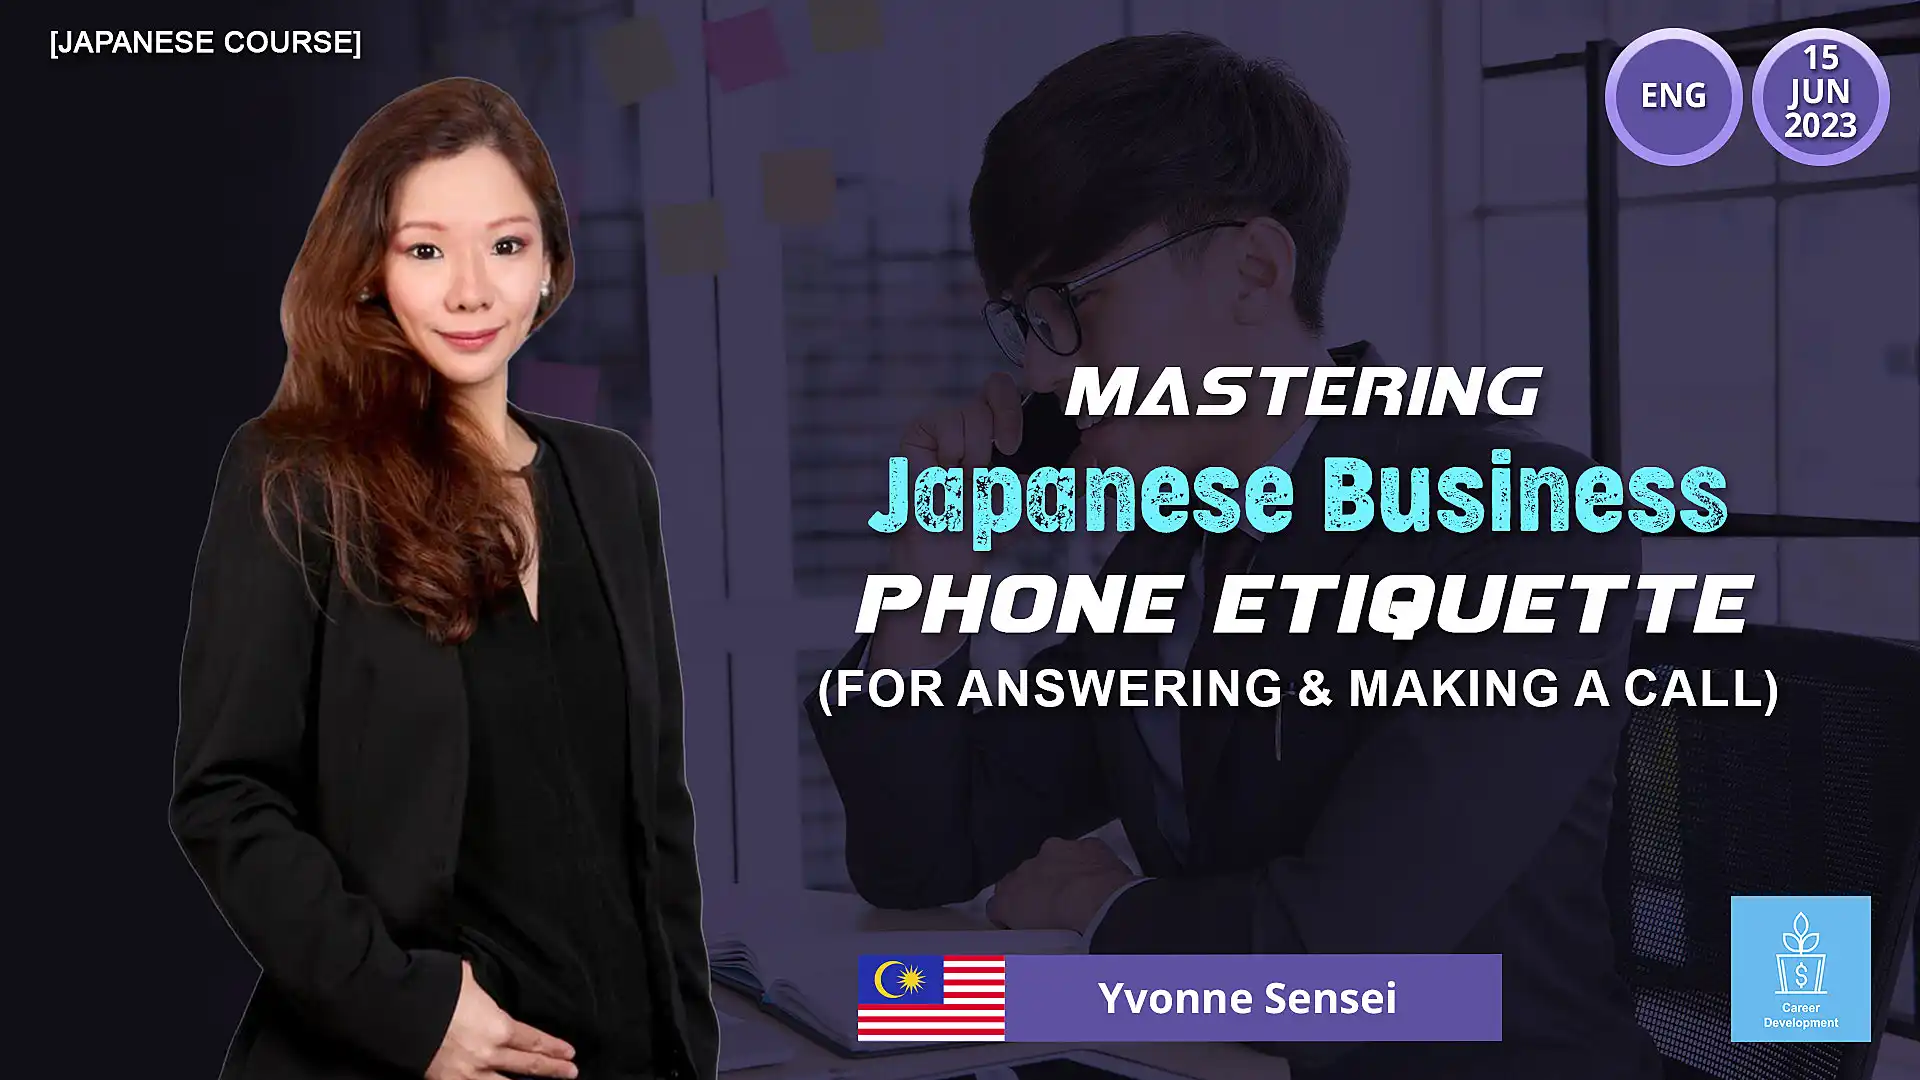 [Japanese Course] Mastering Japanese Business Phone Etiquette (For Answering & Making a Call) - ReSkills